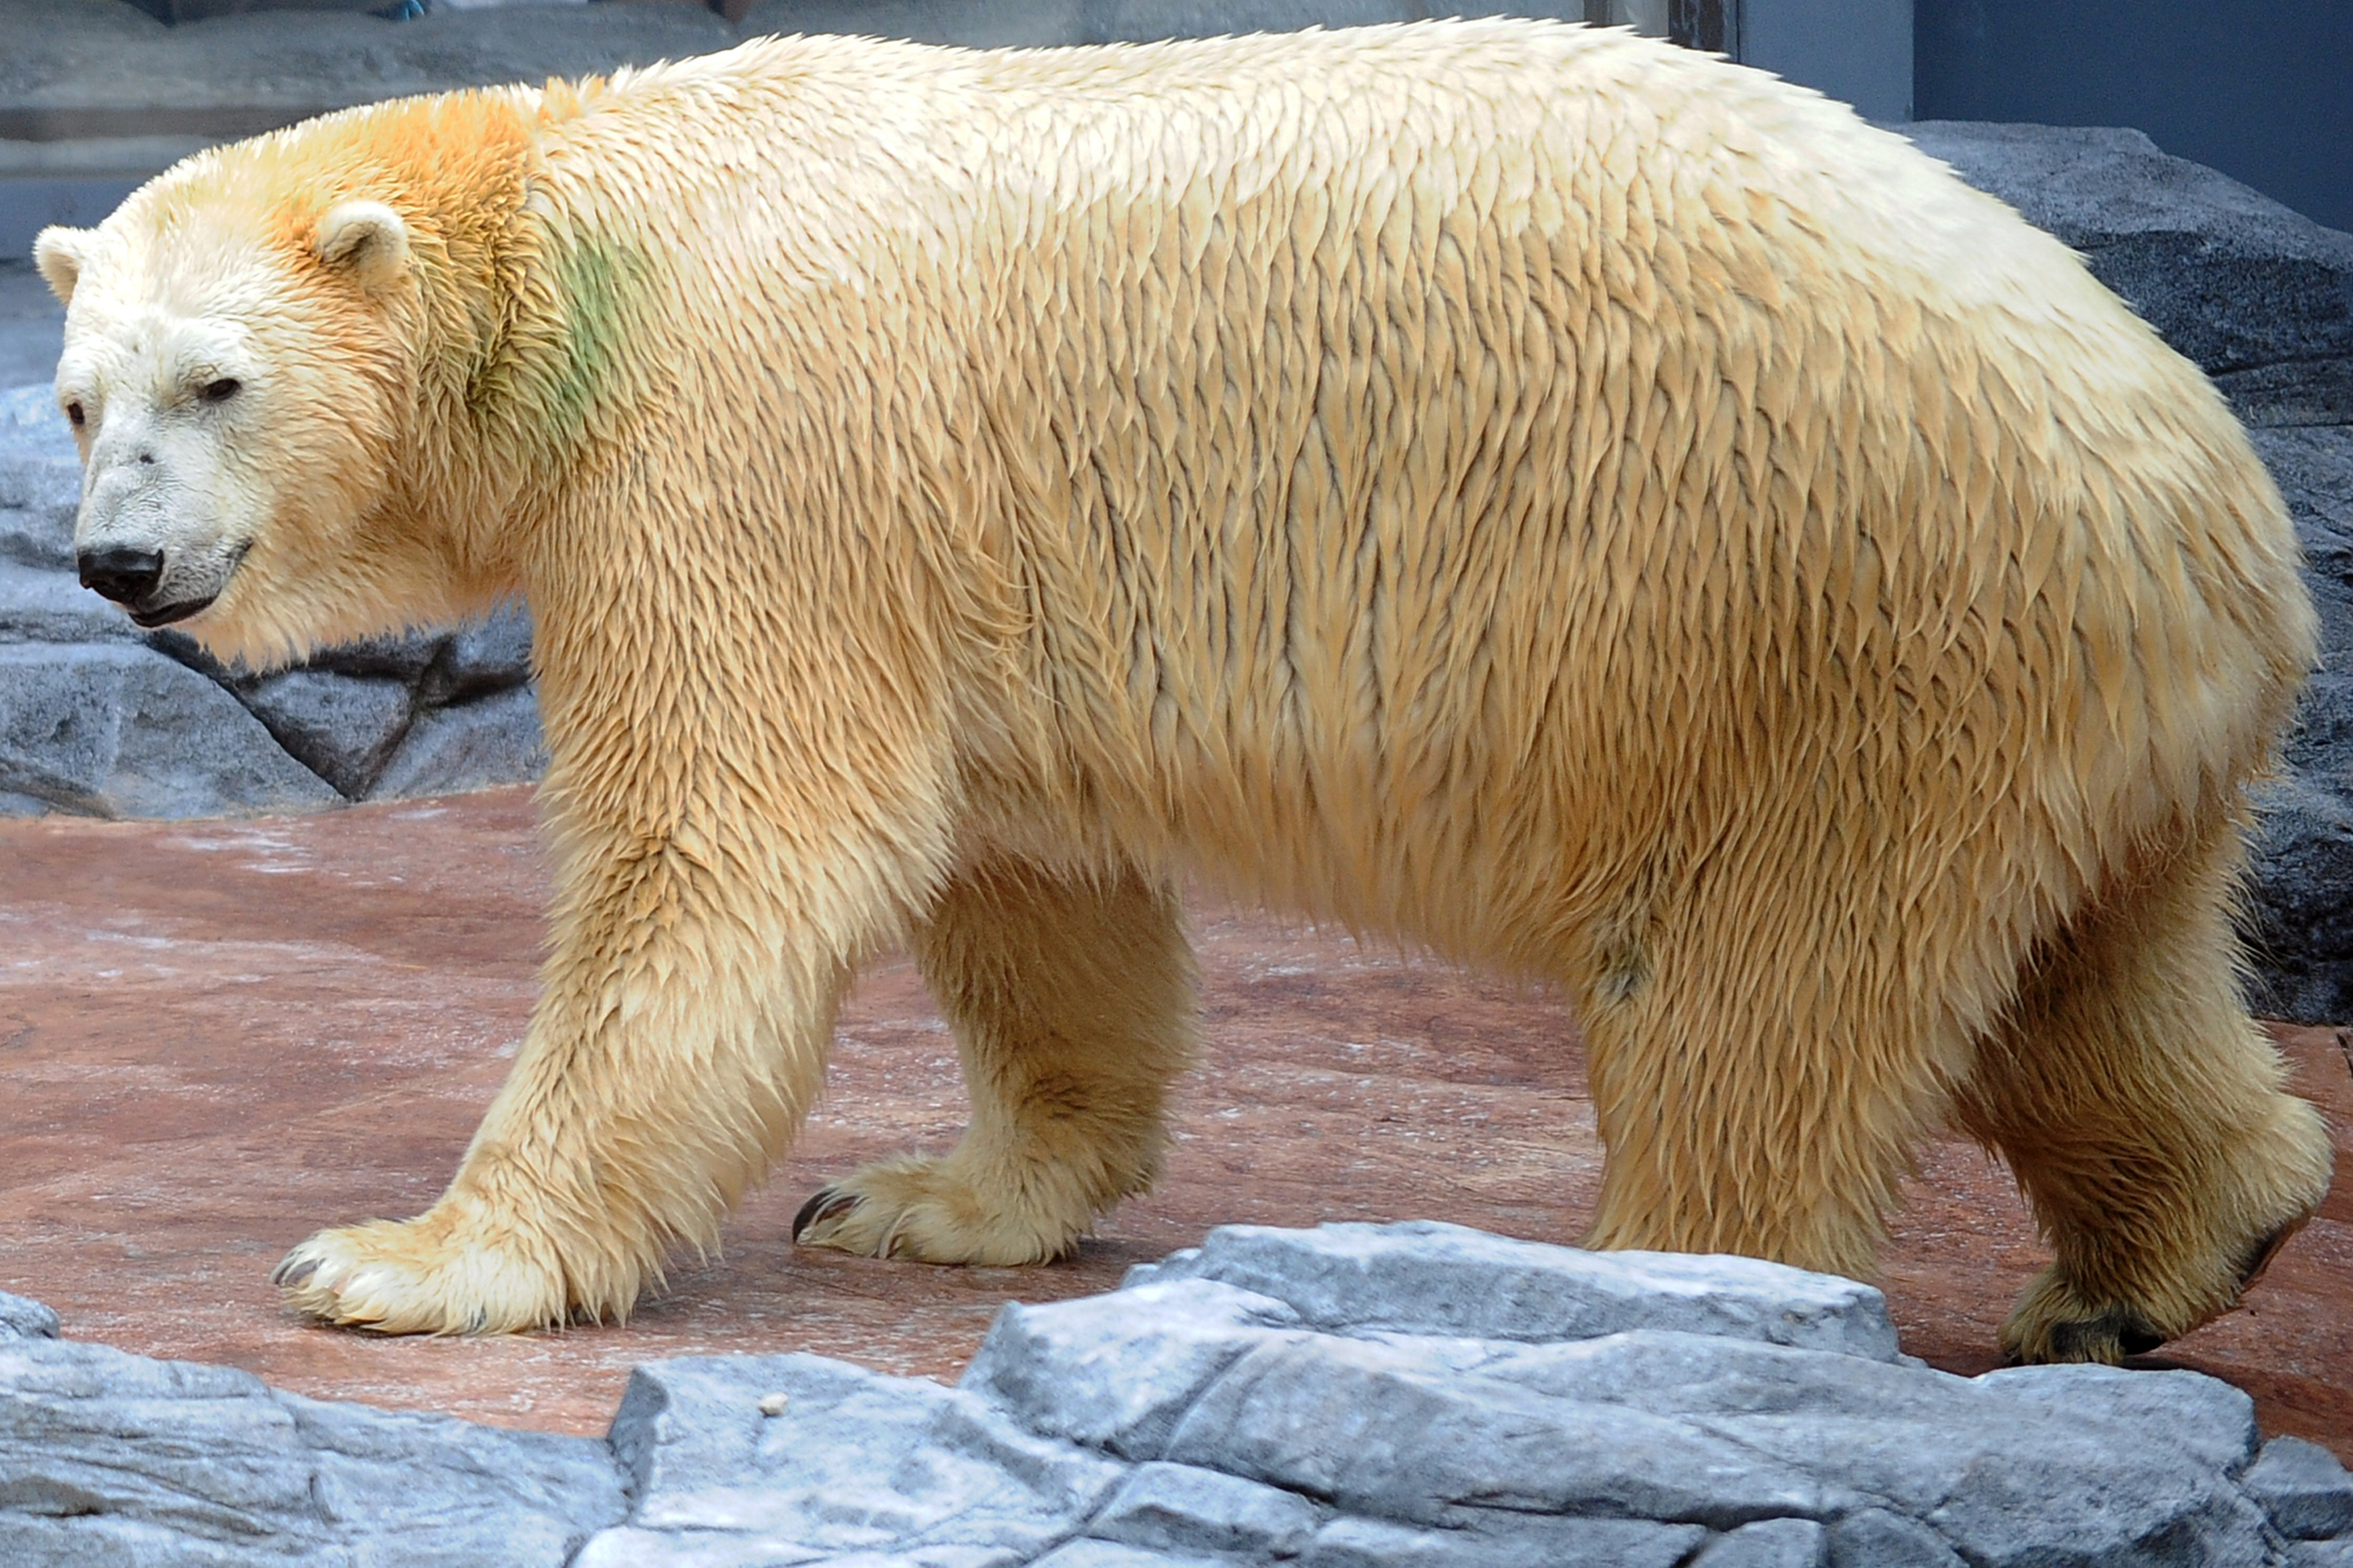 Inuka the polar bear is seen in his enclosure during his 25th birthday at the Singapore Zoo on December 16, 2015. The zoo is kicking off a ten-day birthday celebration for Inuka along with a photo exhibition to raise awareness on the natural artic habitat of polar bears. AFP PHOTO / MOHD FYROL / AFP PHOTO / MOHD FYROL